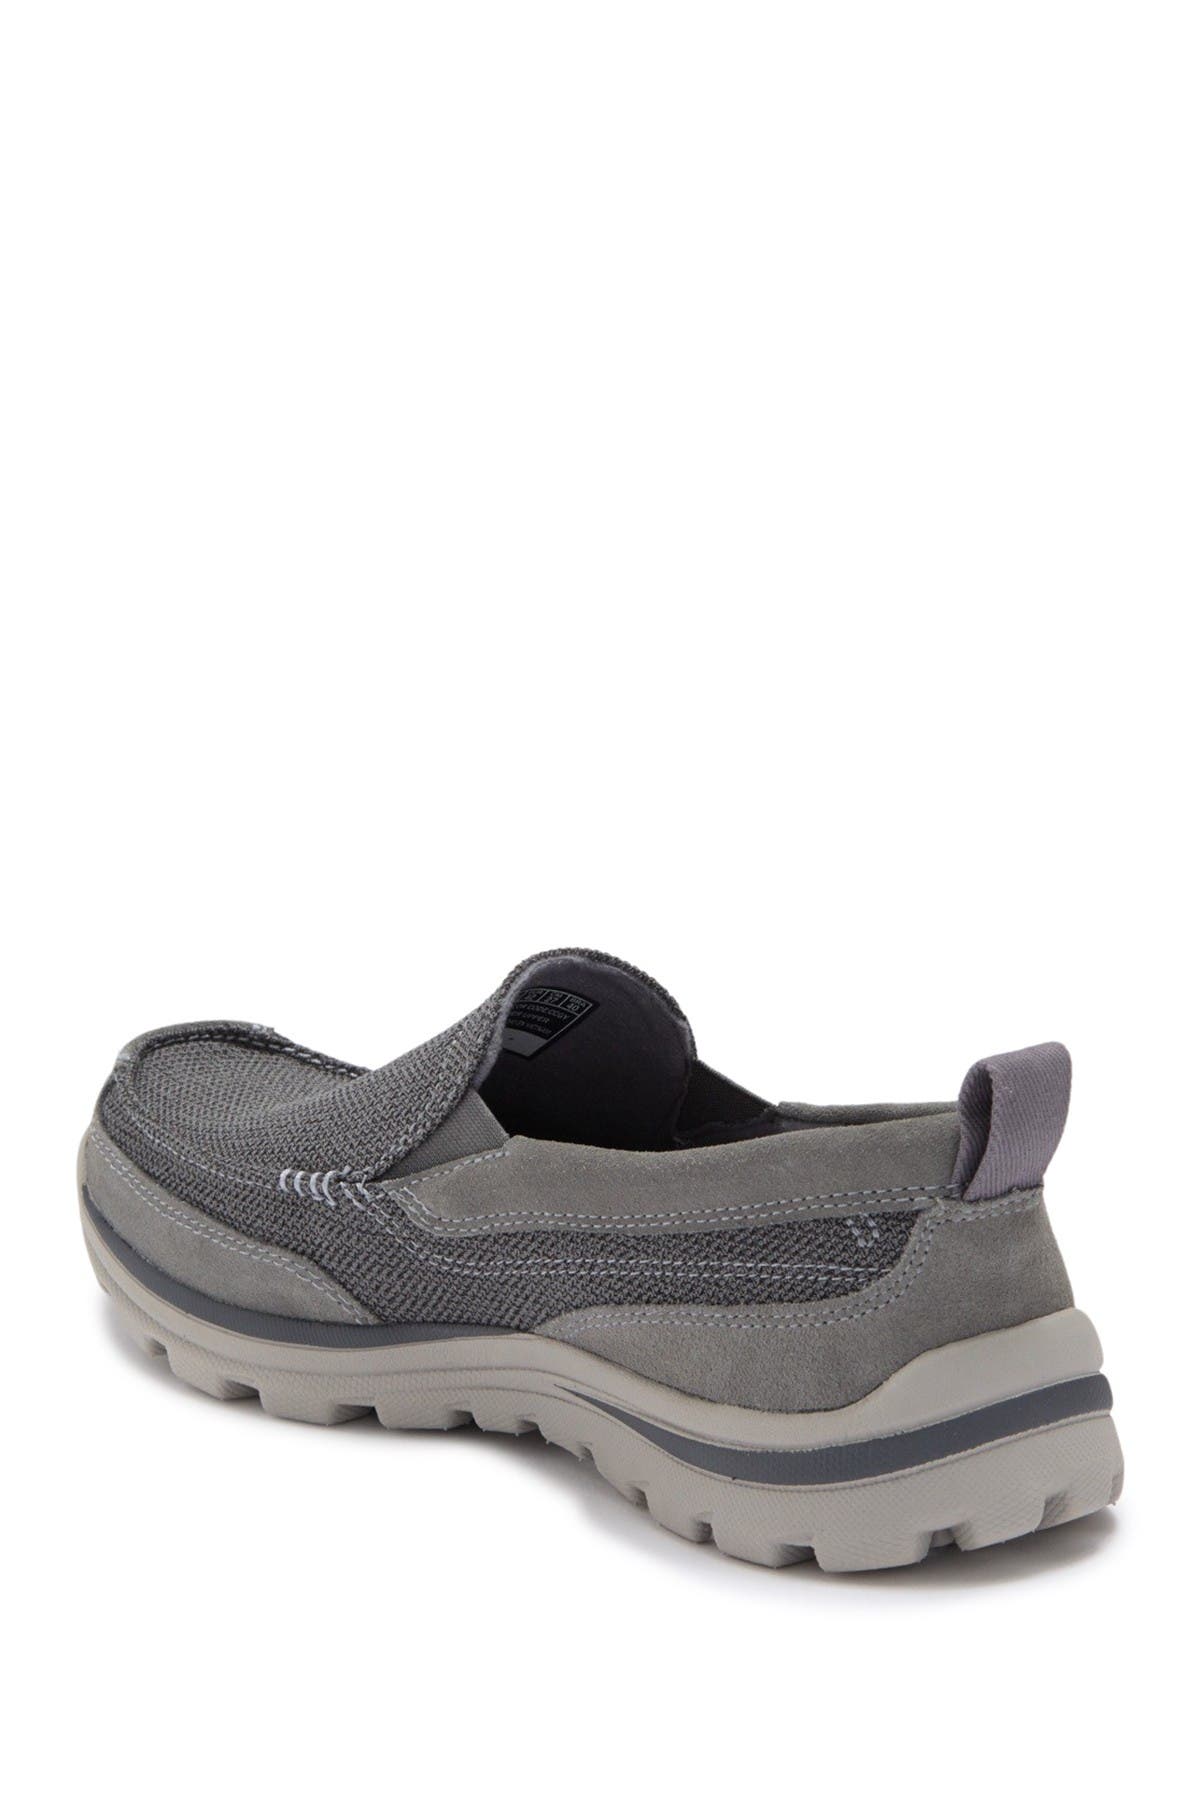 Skechers Superior Milford Loafer In Ccgy-charc